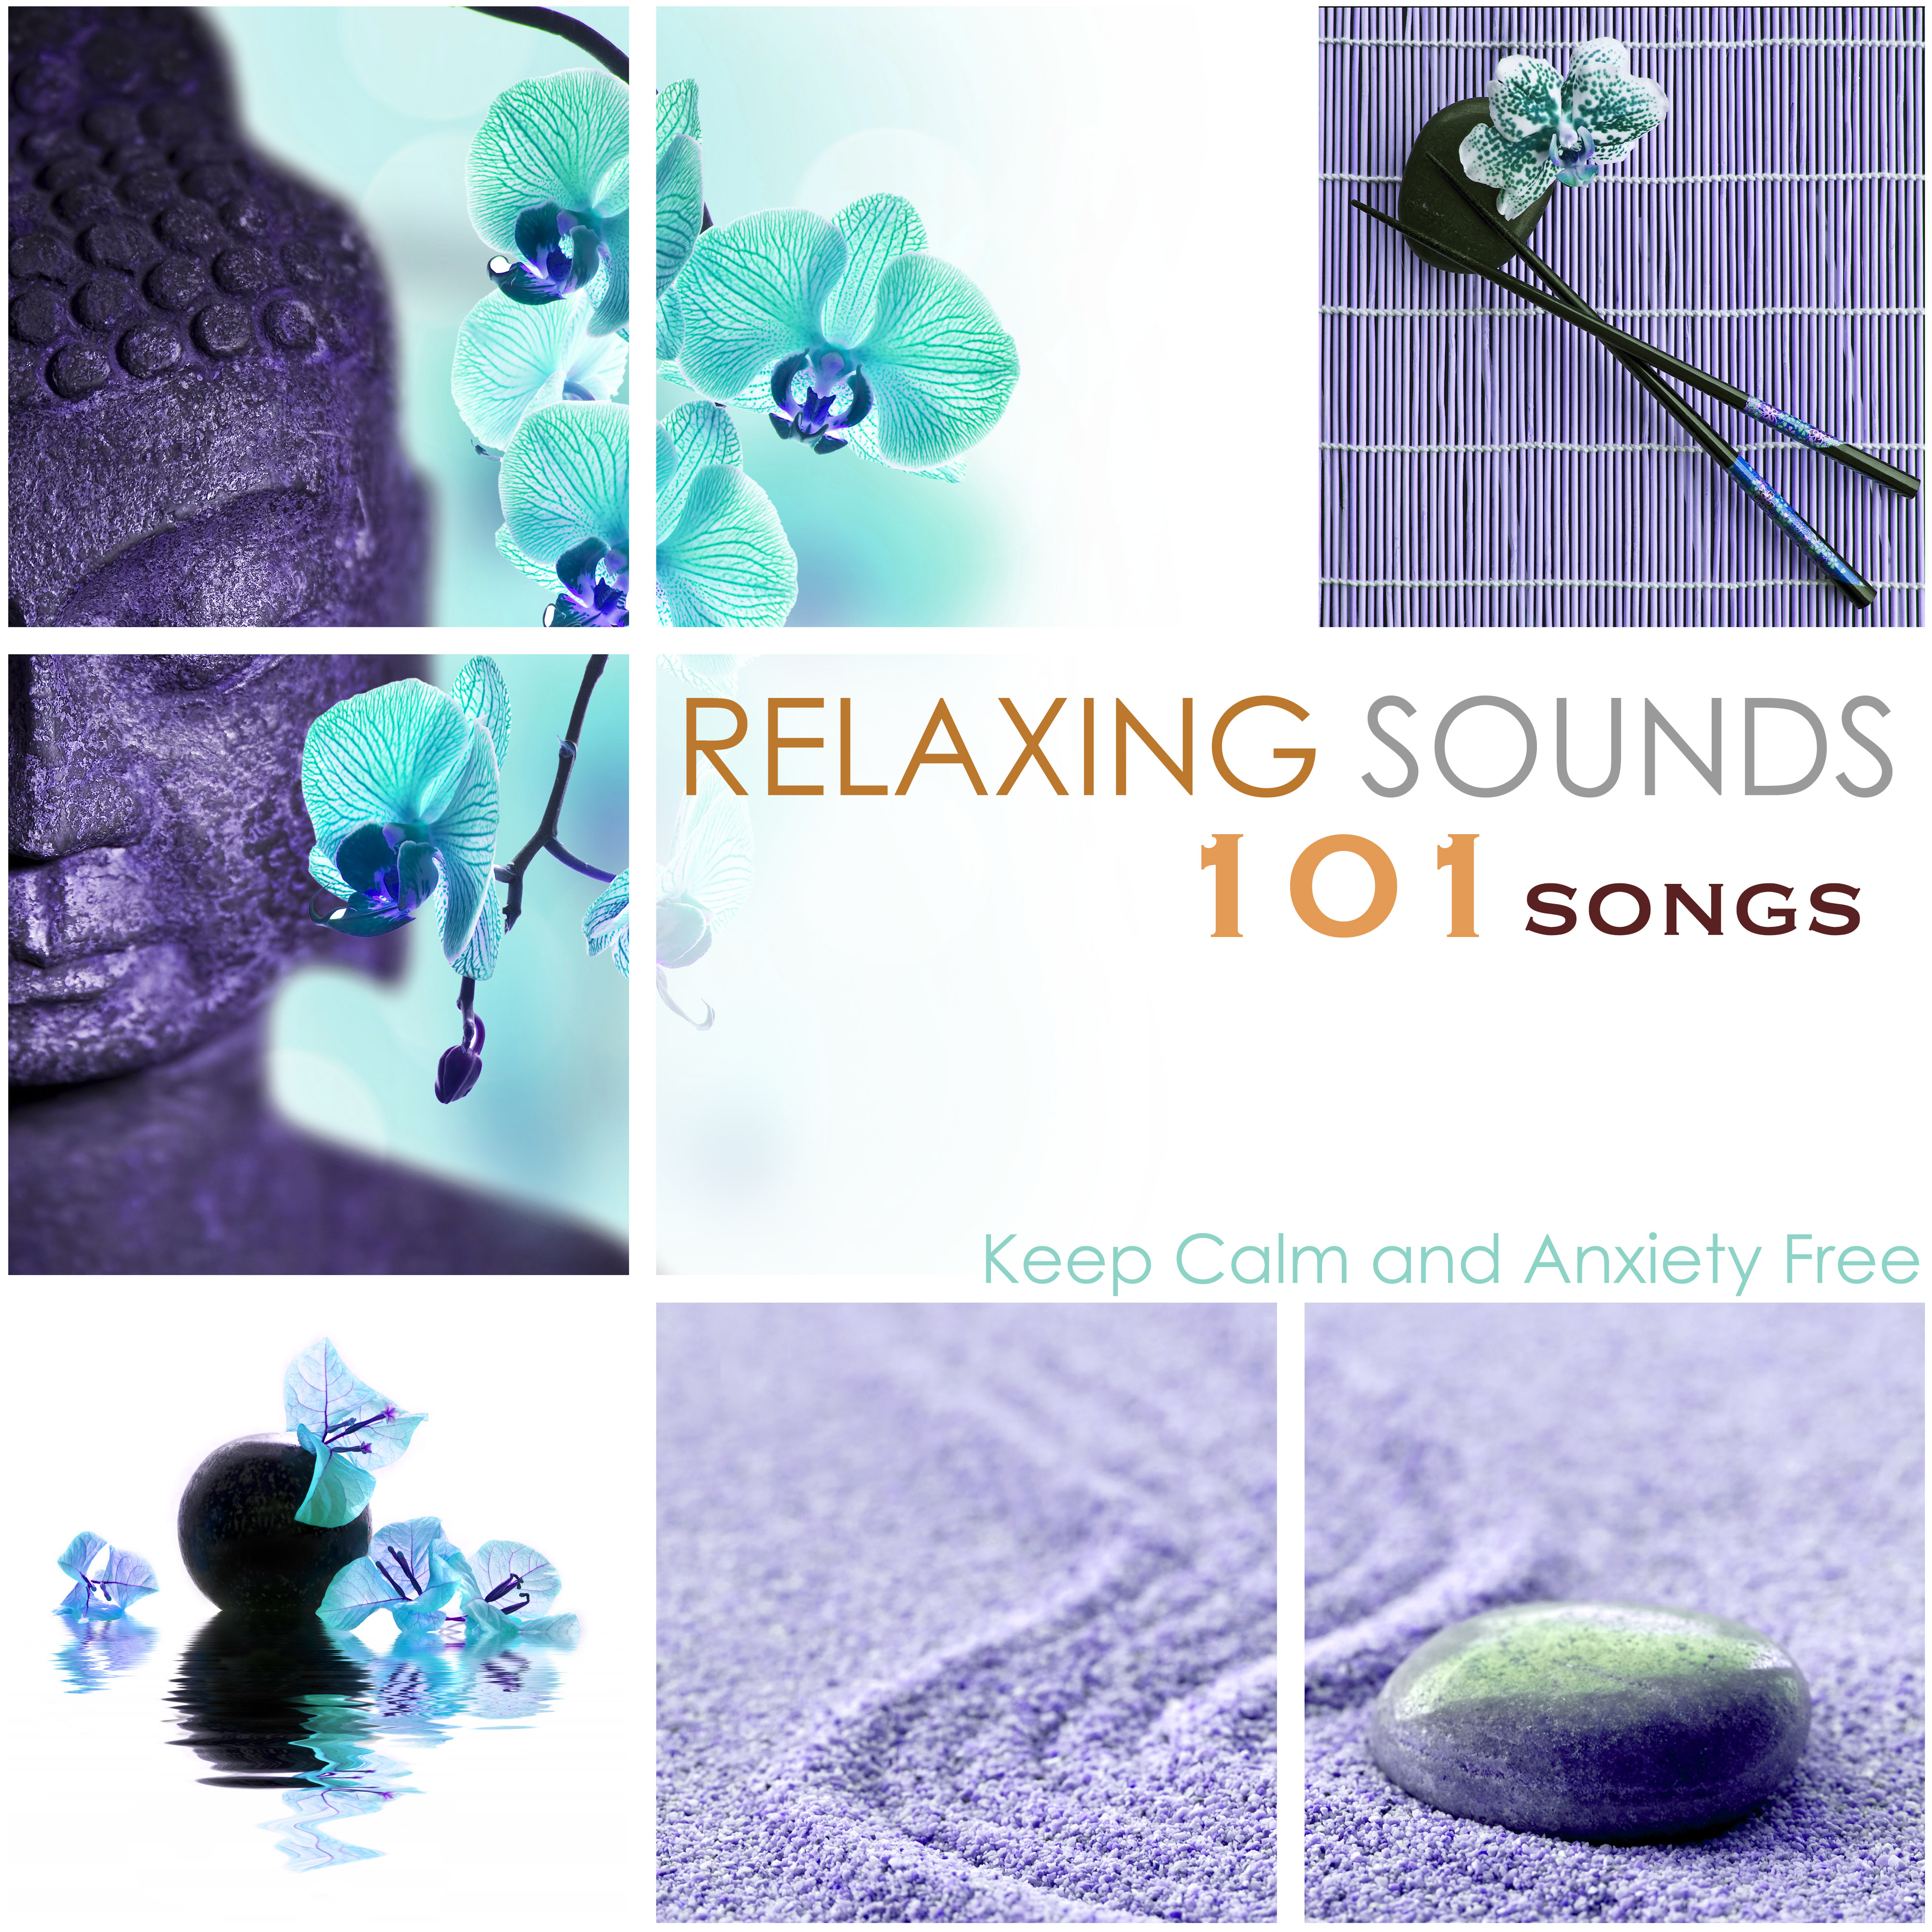 Relaxing Sounds 101